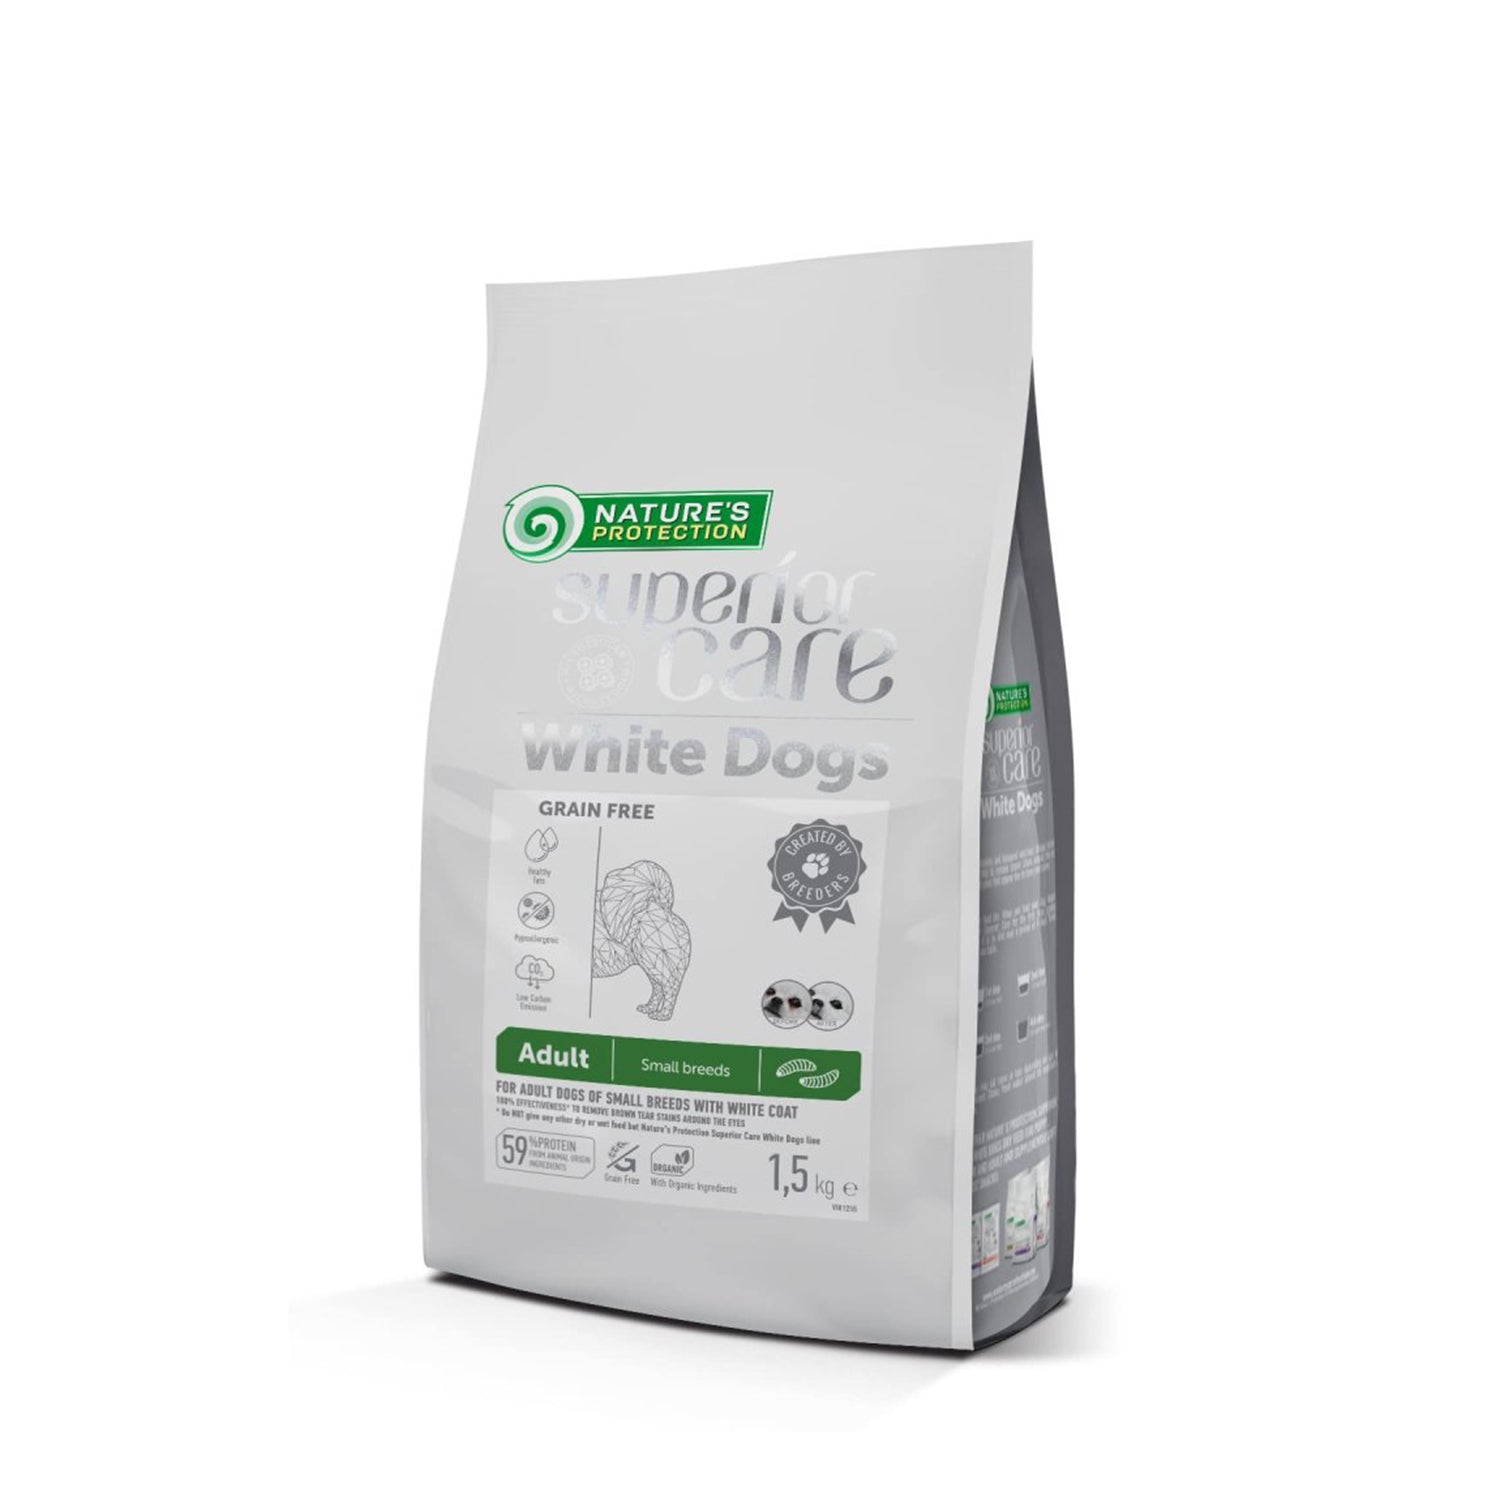 Nature's Protection Superior Care Adult small white dog